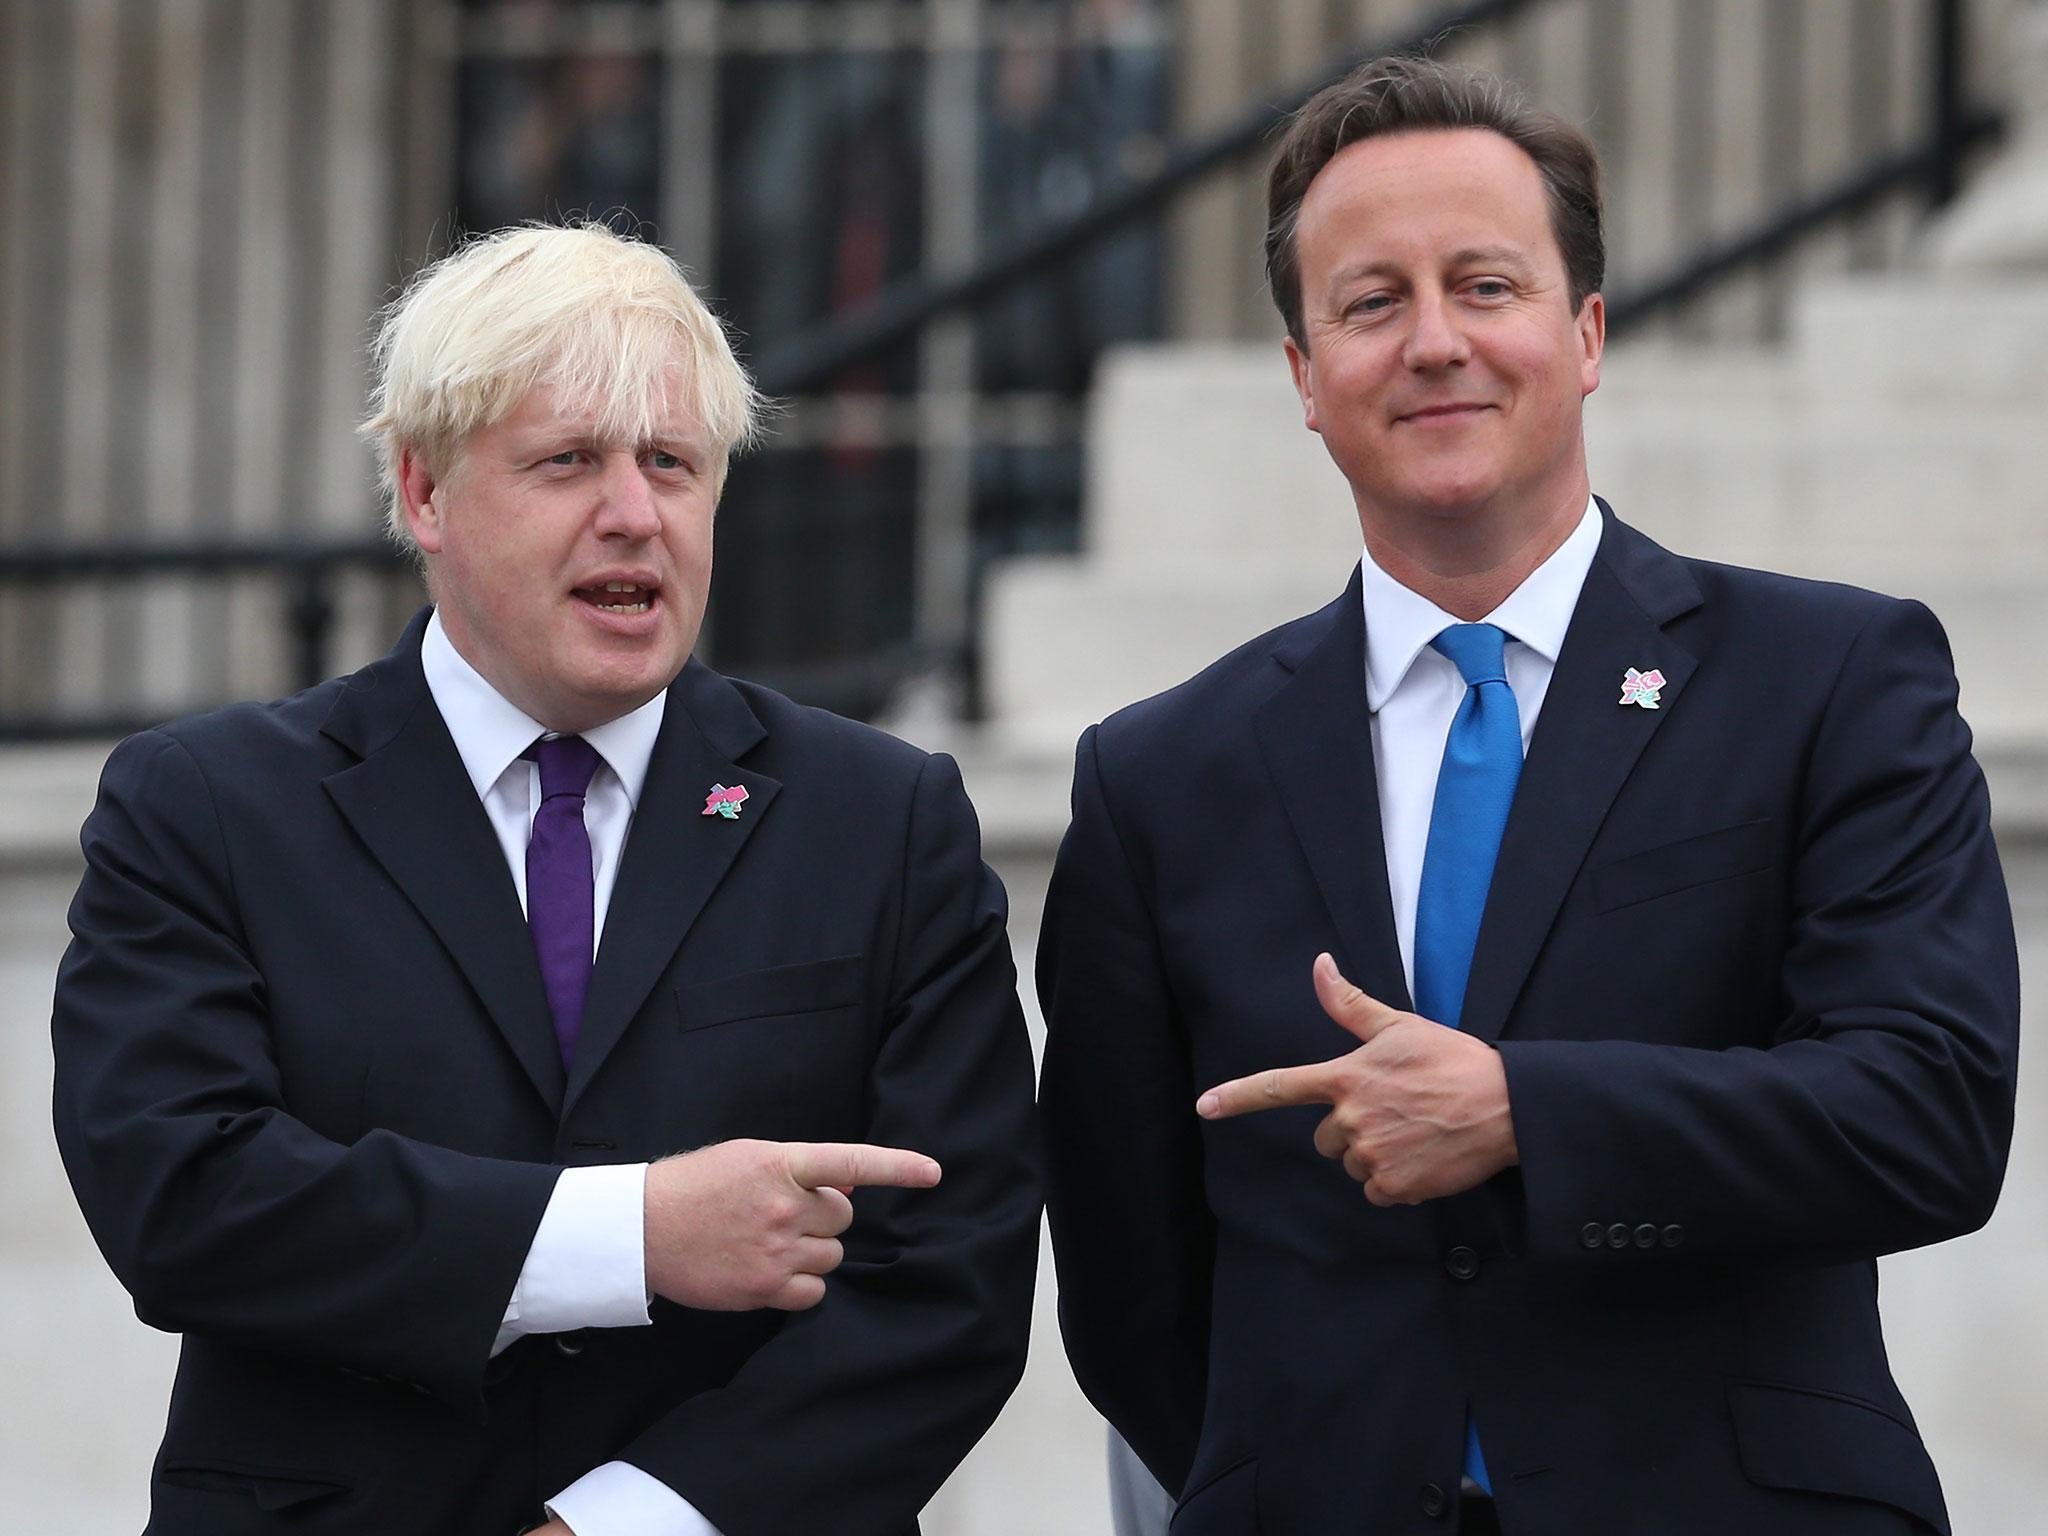 Boris Johnson joining the Leave campaign reportedly remains a sore point for Mr Cameron